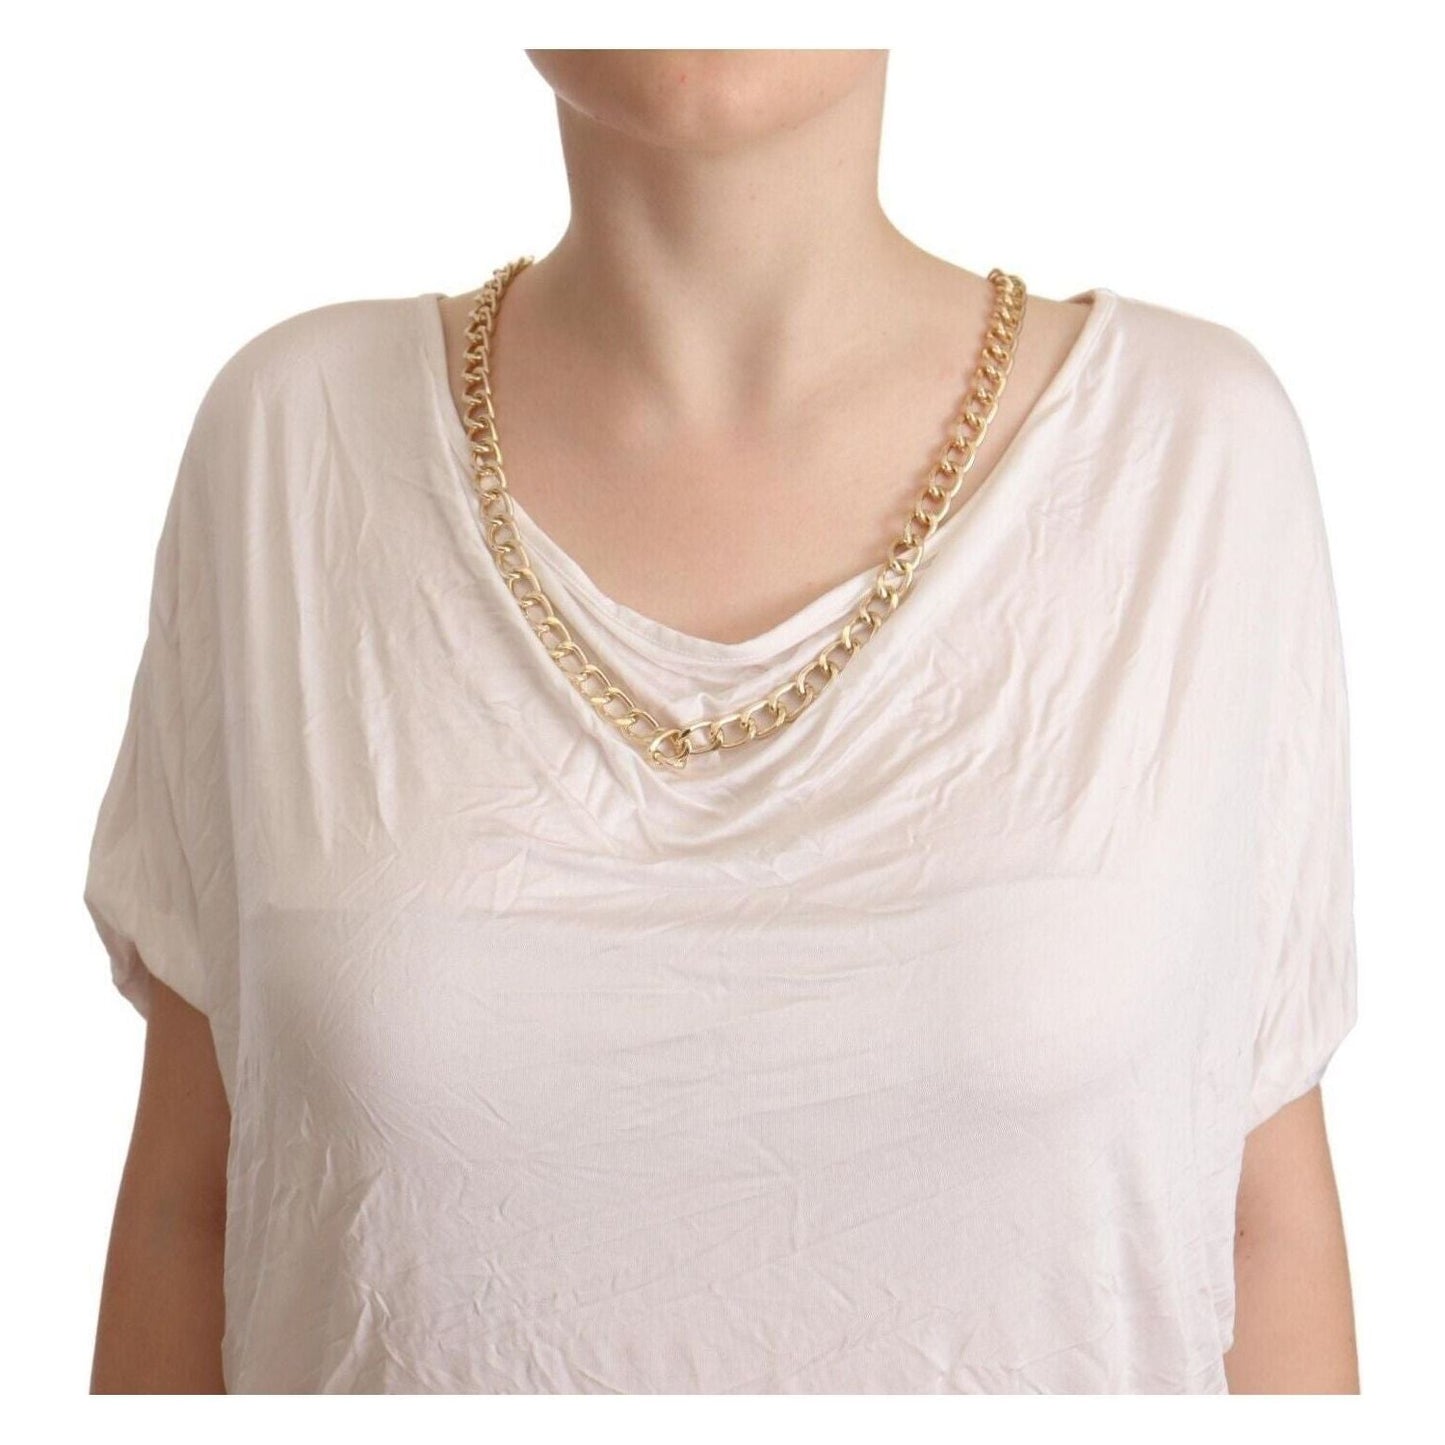 Guess By Marciano Elegant White Gold Chain T-Shirt Top white-short-sleeves-gold-chain-t-shirt-top s-l1600-3-2-6488c883-2cd.jpg